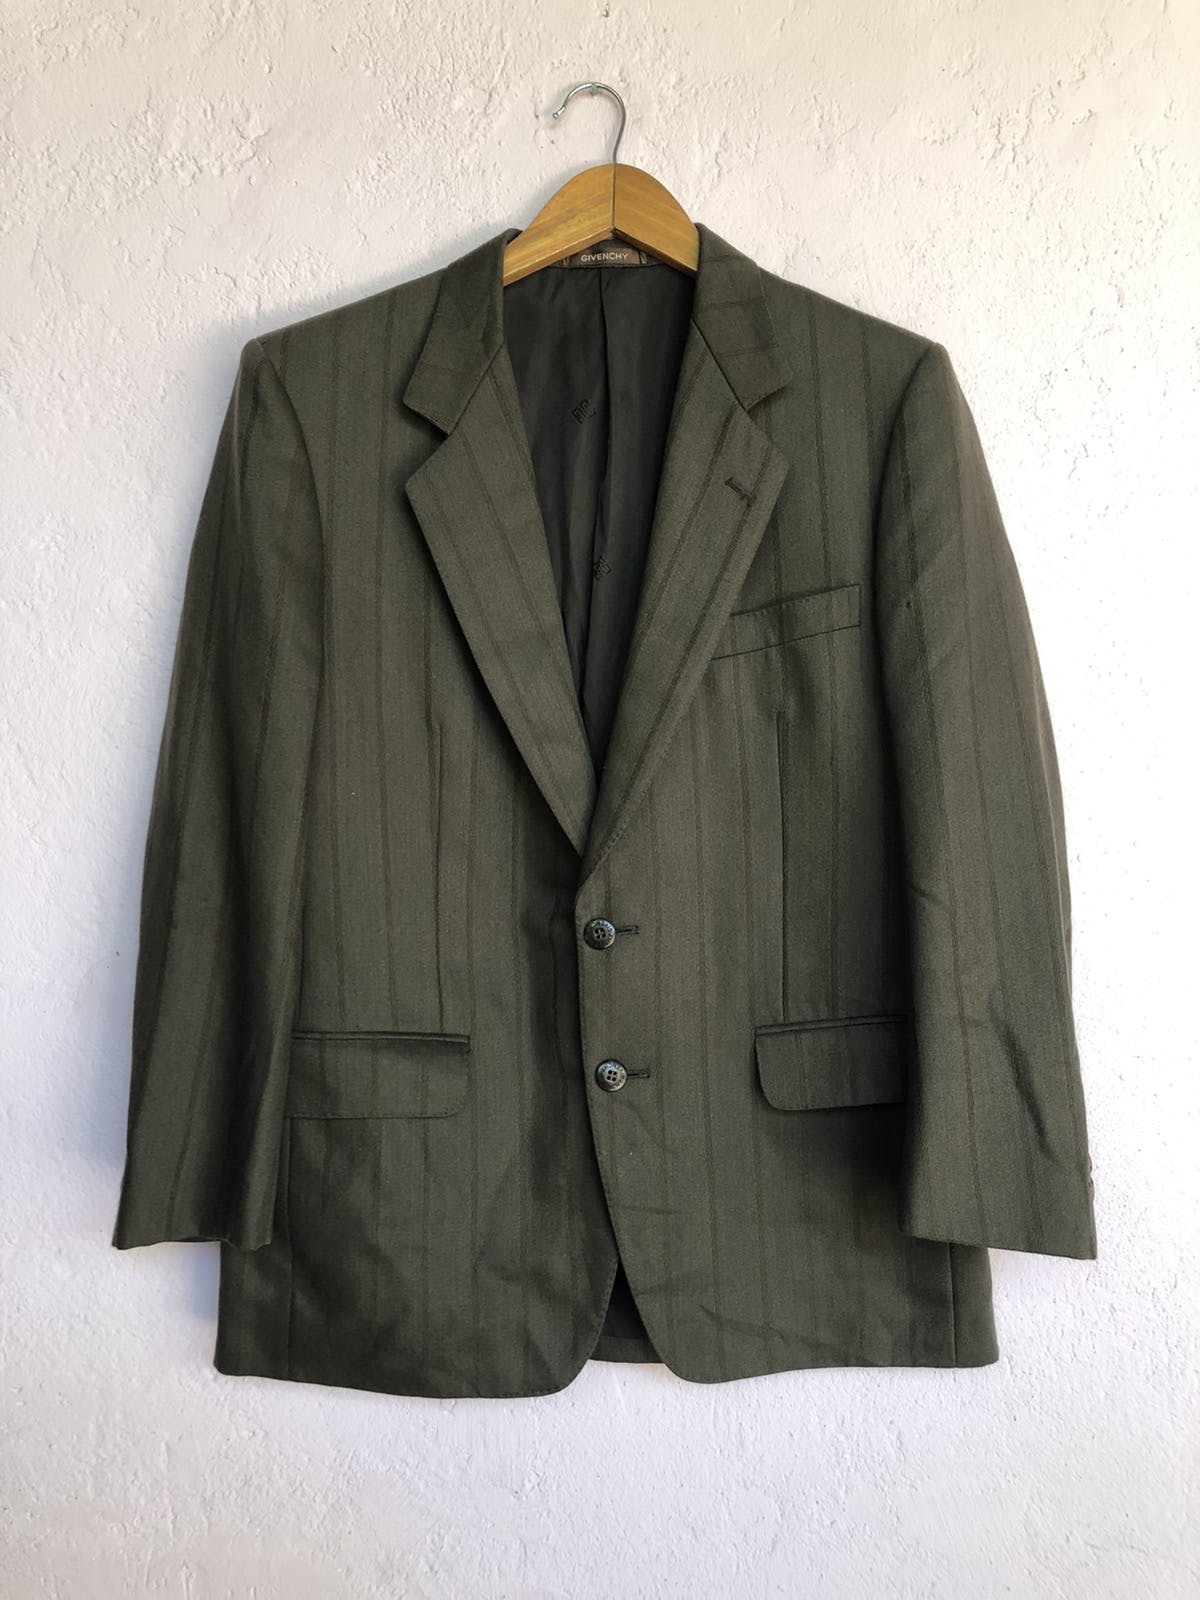 Givenchy Men’s tailored jackets good condition - 1